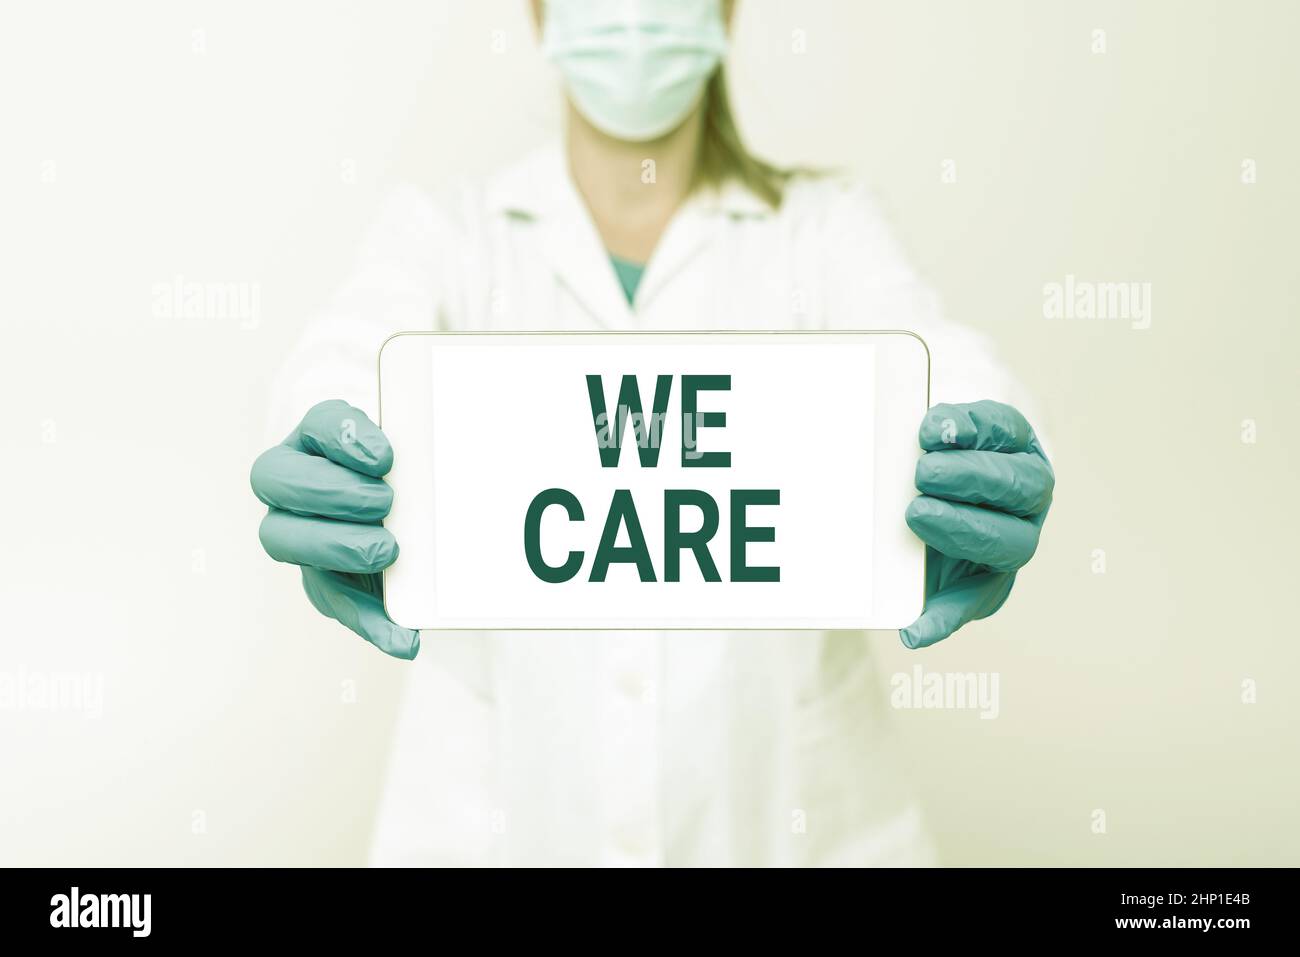 Text caption presenting We Care, Business approach Cherishing someones life Giving care and providing their needs Demonstrating Medical Techology Pres Stock Photo